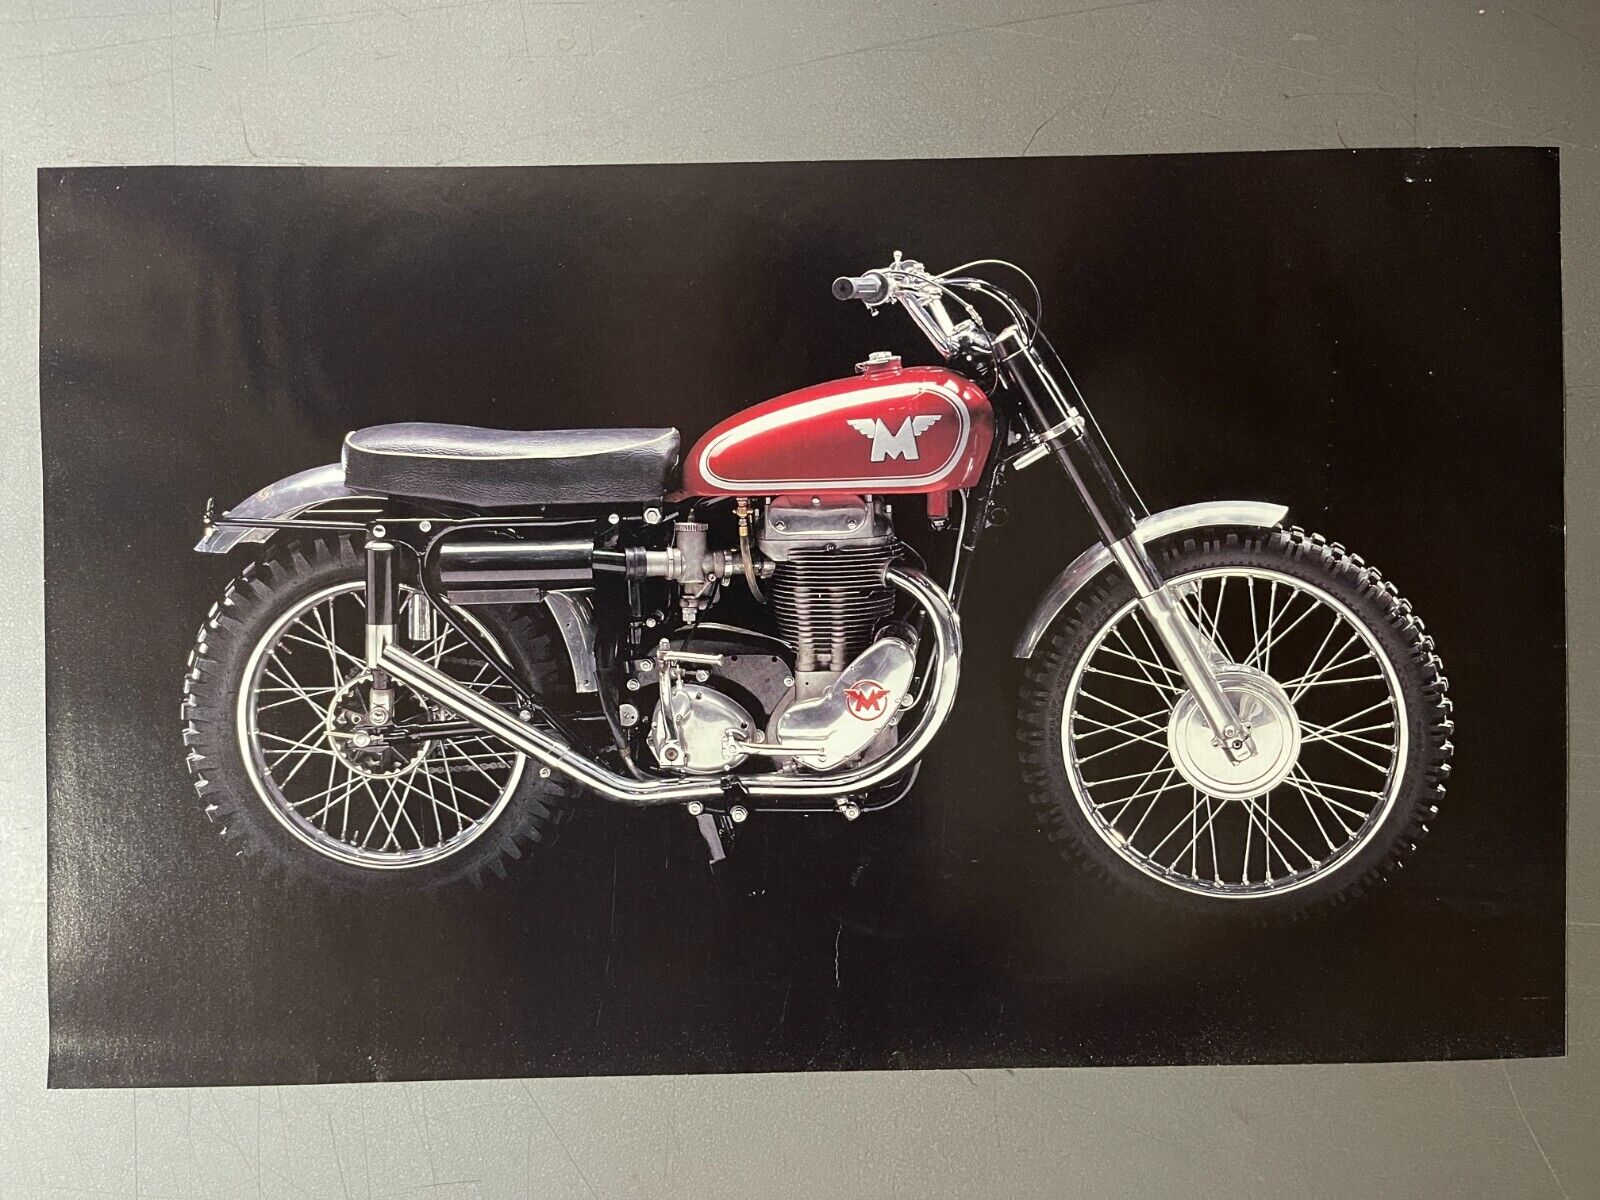 1960 Matchless G80 CS Motorcycle Picture, Print - RARE Awesome L@@K